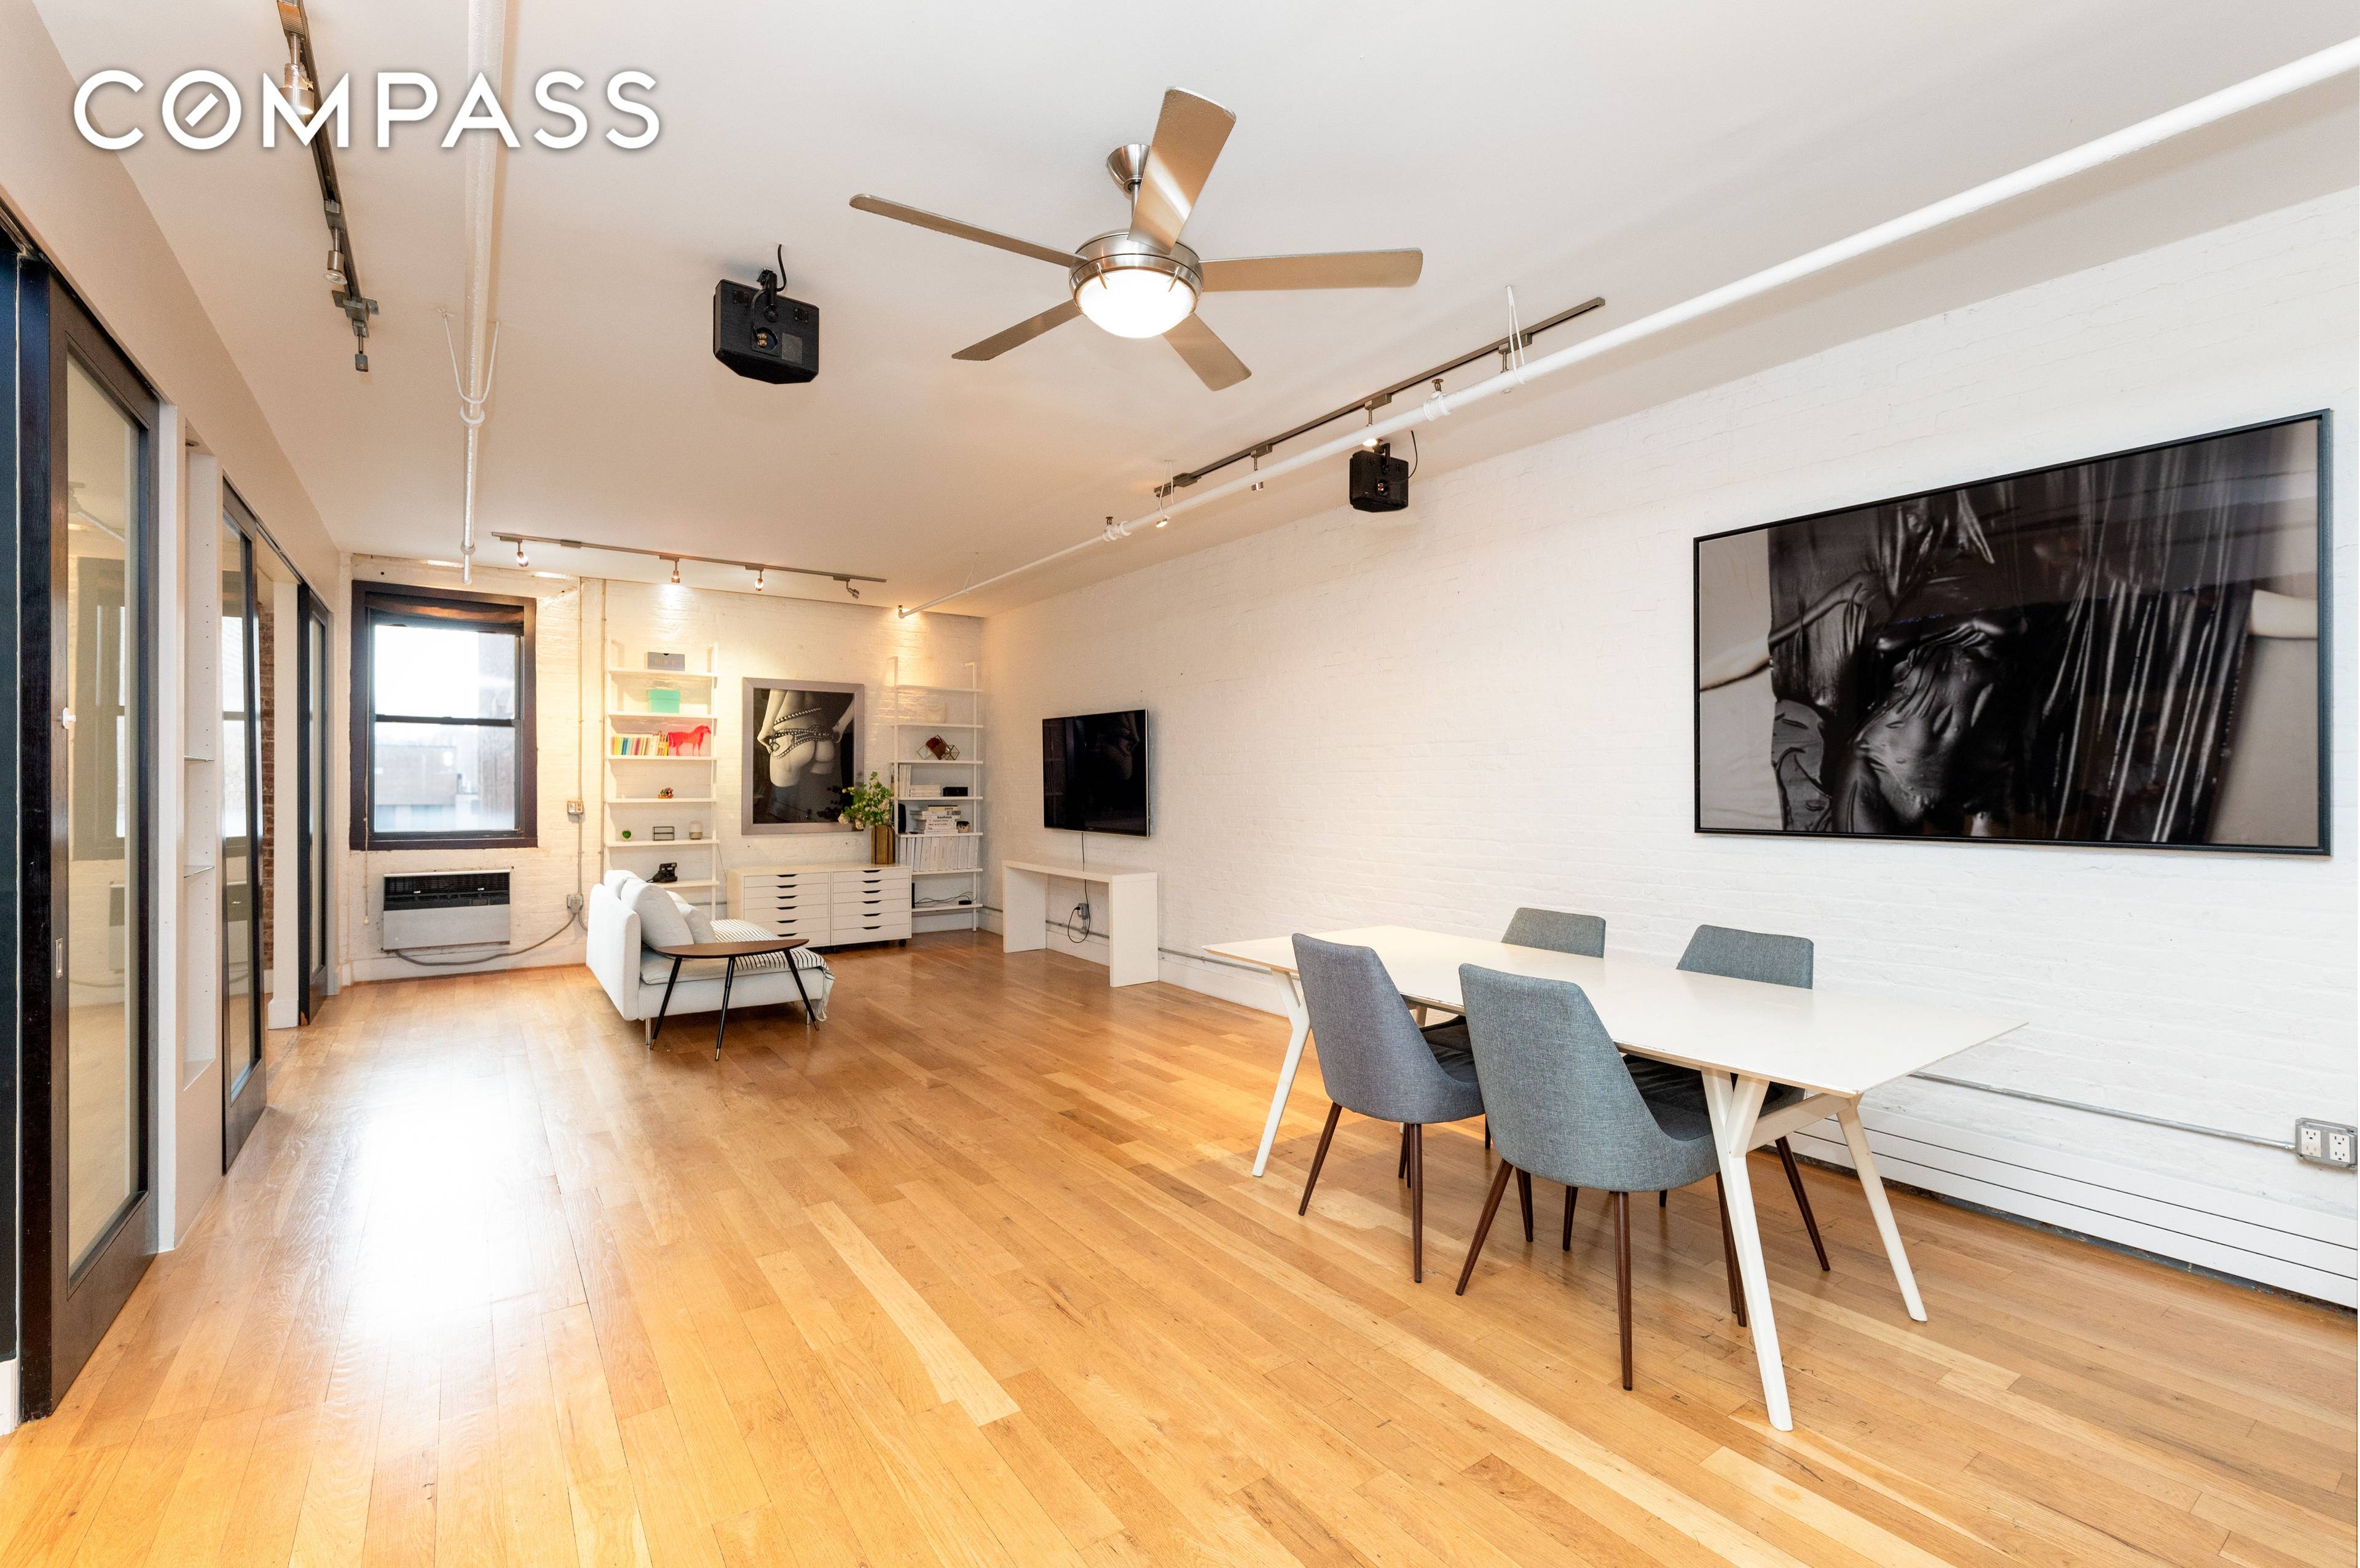 Experience the epitome of modern loft living in this two bedroom loft at 50 Bridge Street, nestled in the heart of the historic DUMBO district.